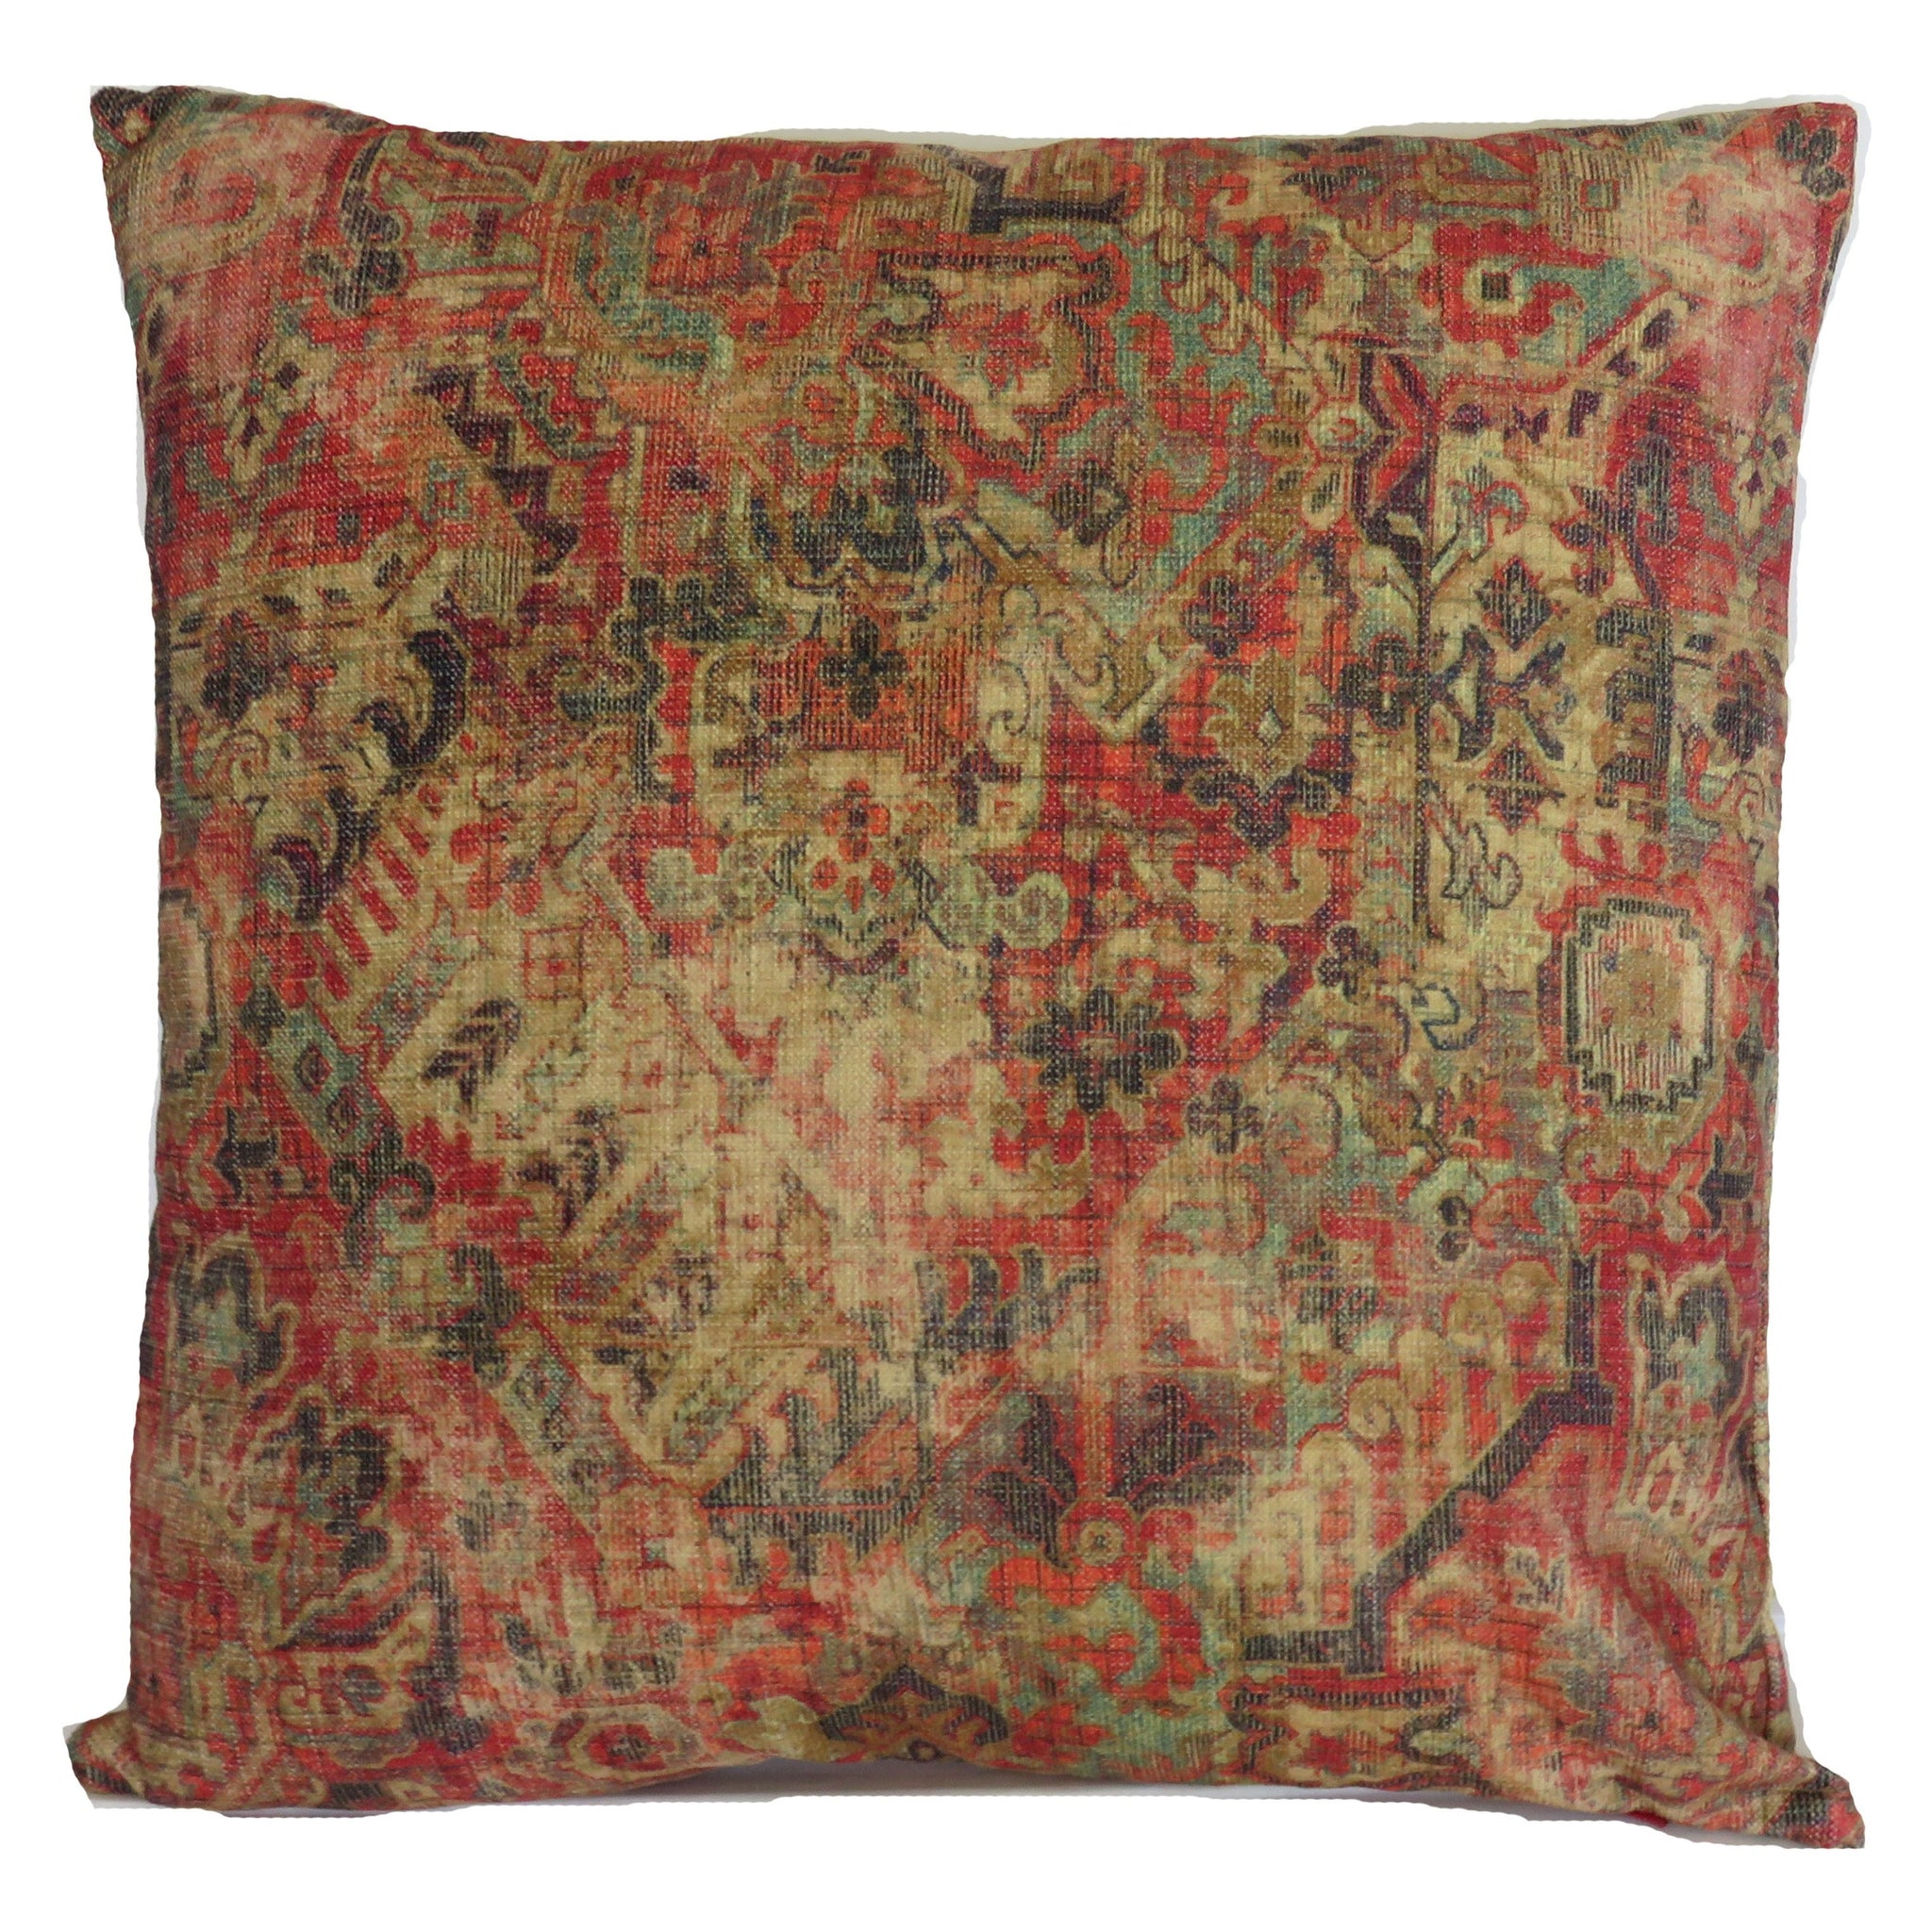 waverly cumbrae velvet fabric pillow cover in red, gold, turquoise